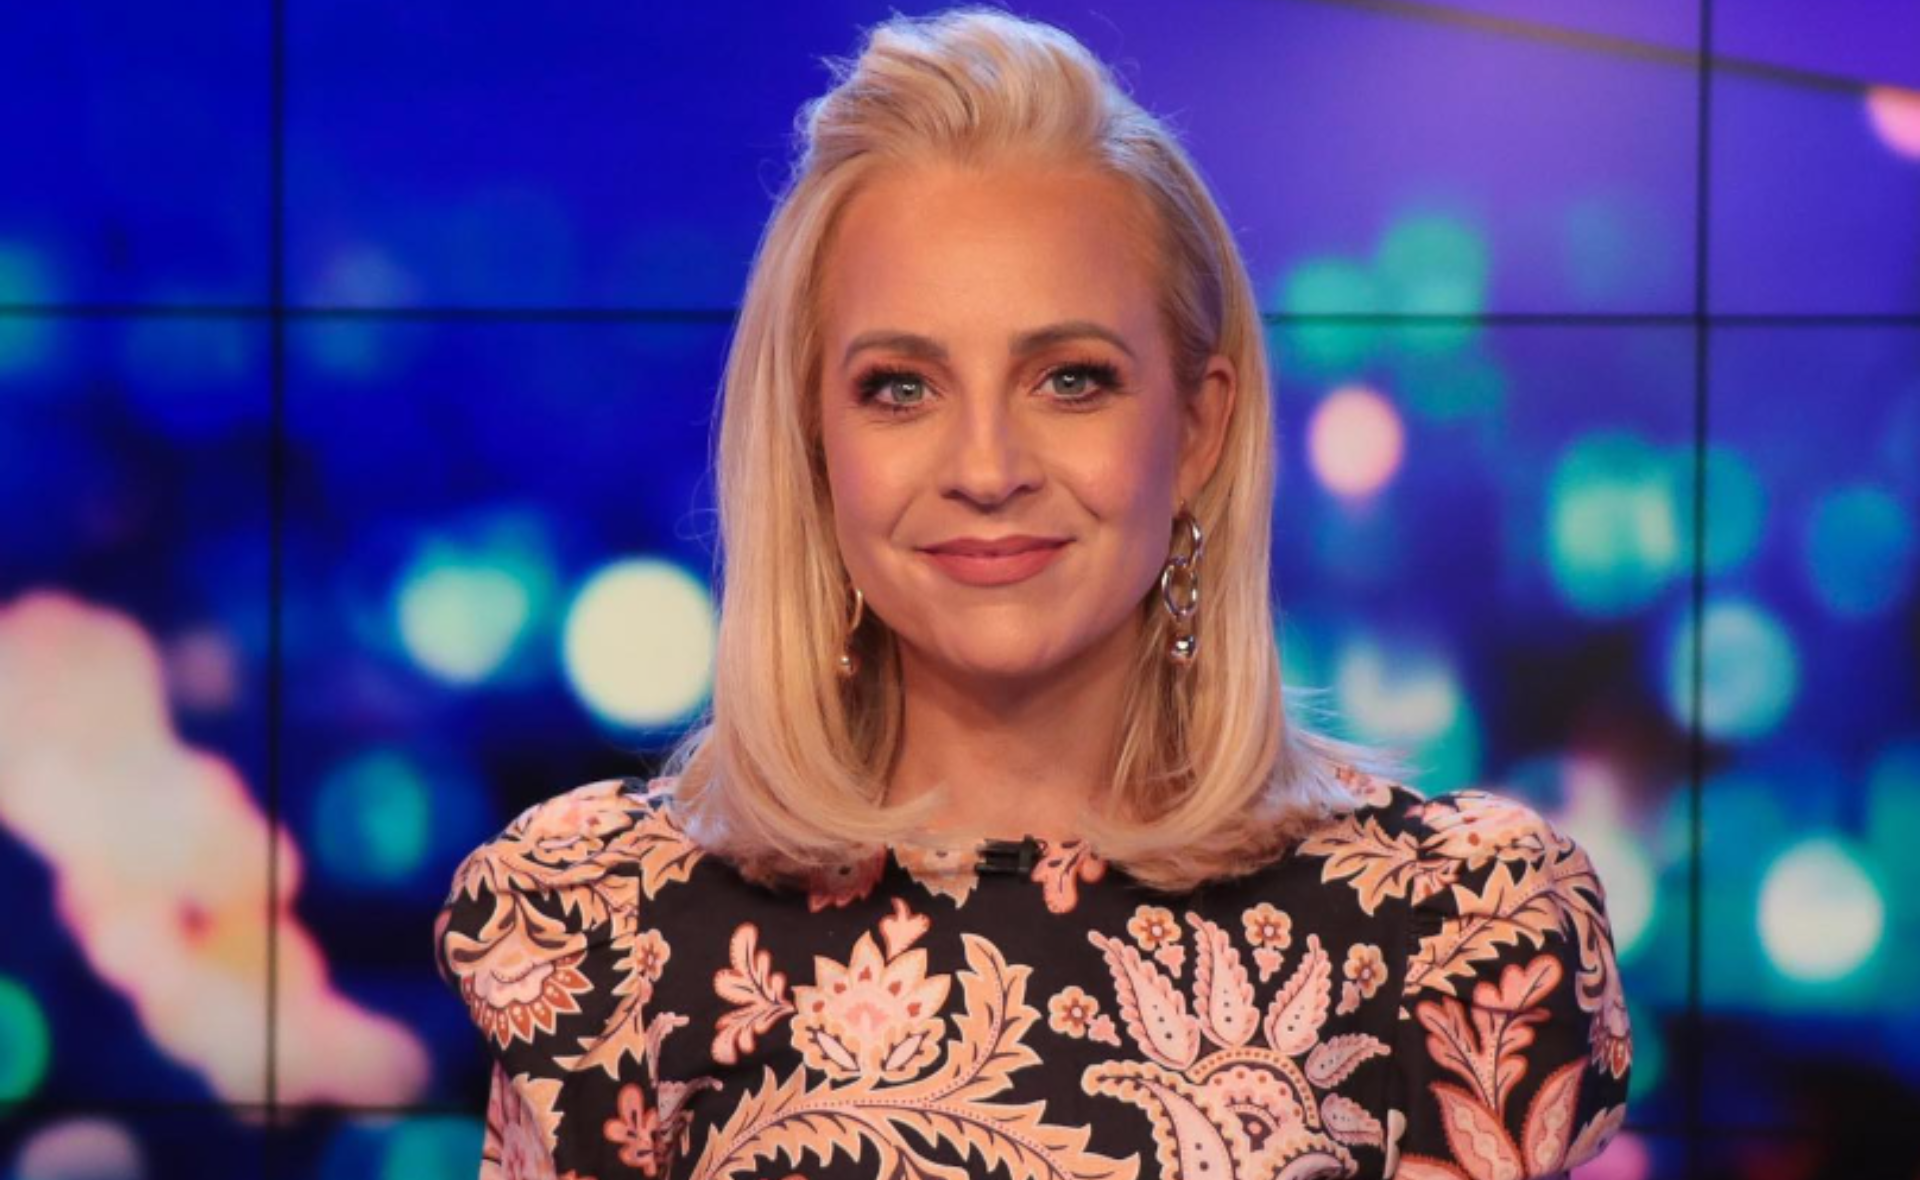 Carrie Bickmore shocks fans with her latest career move